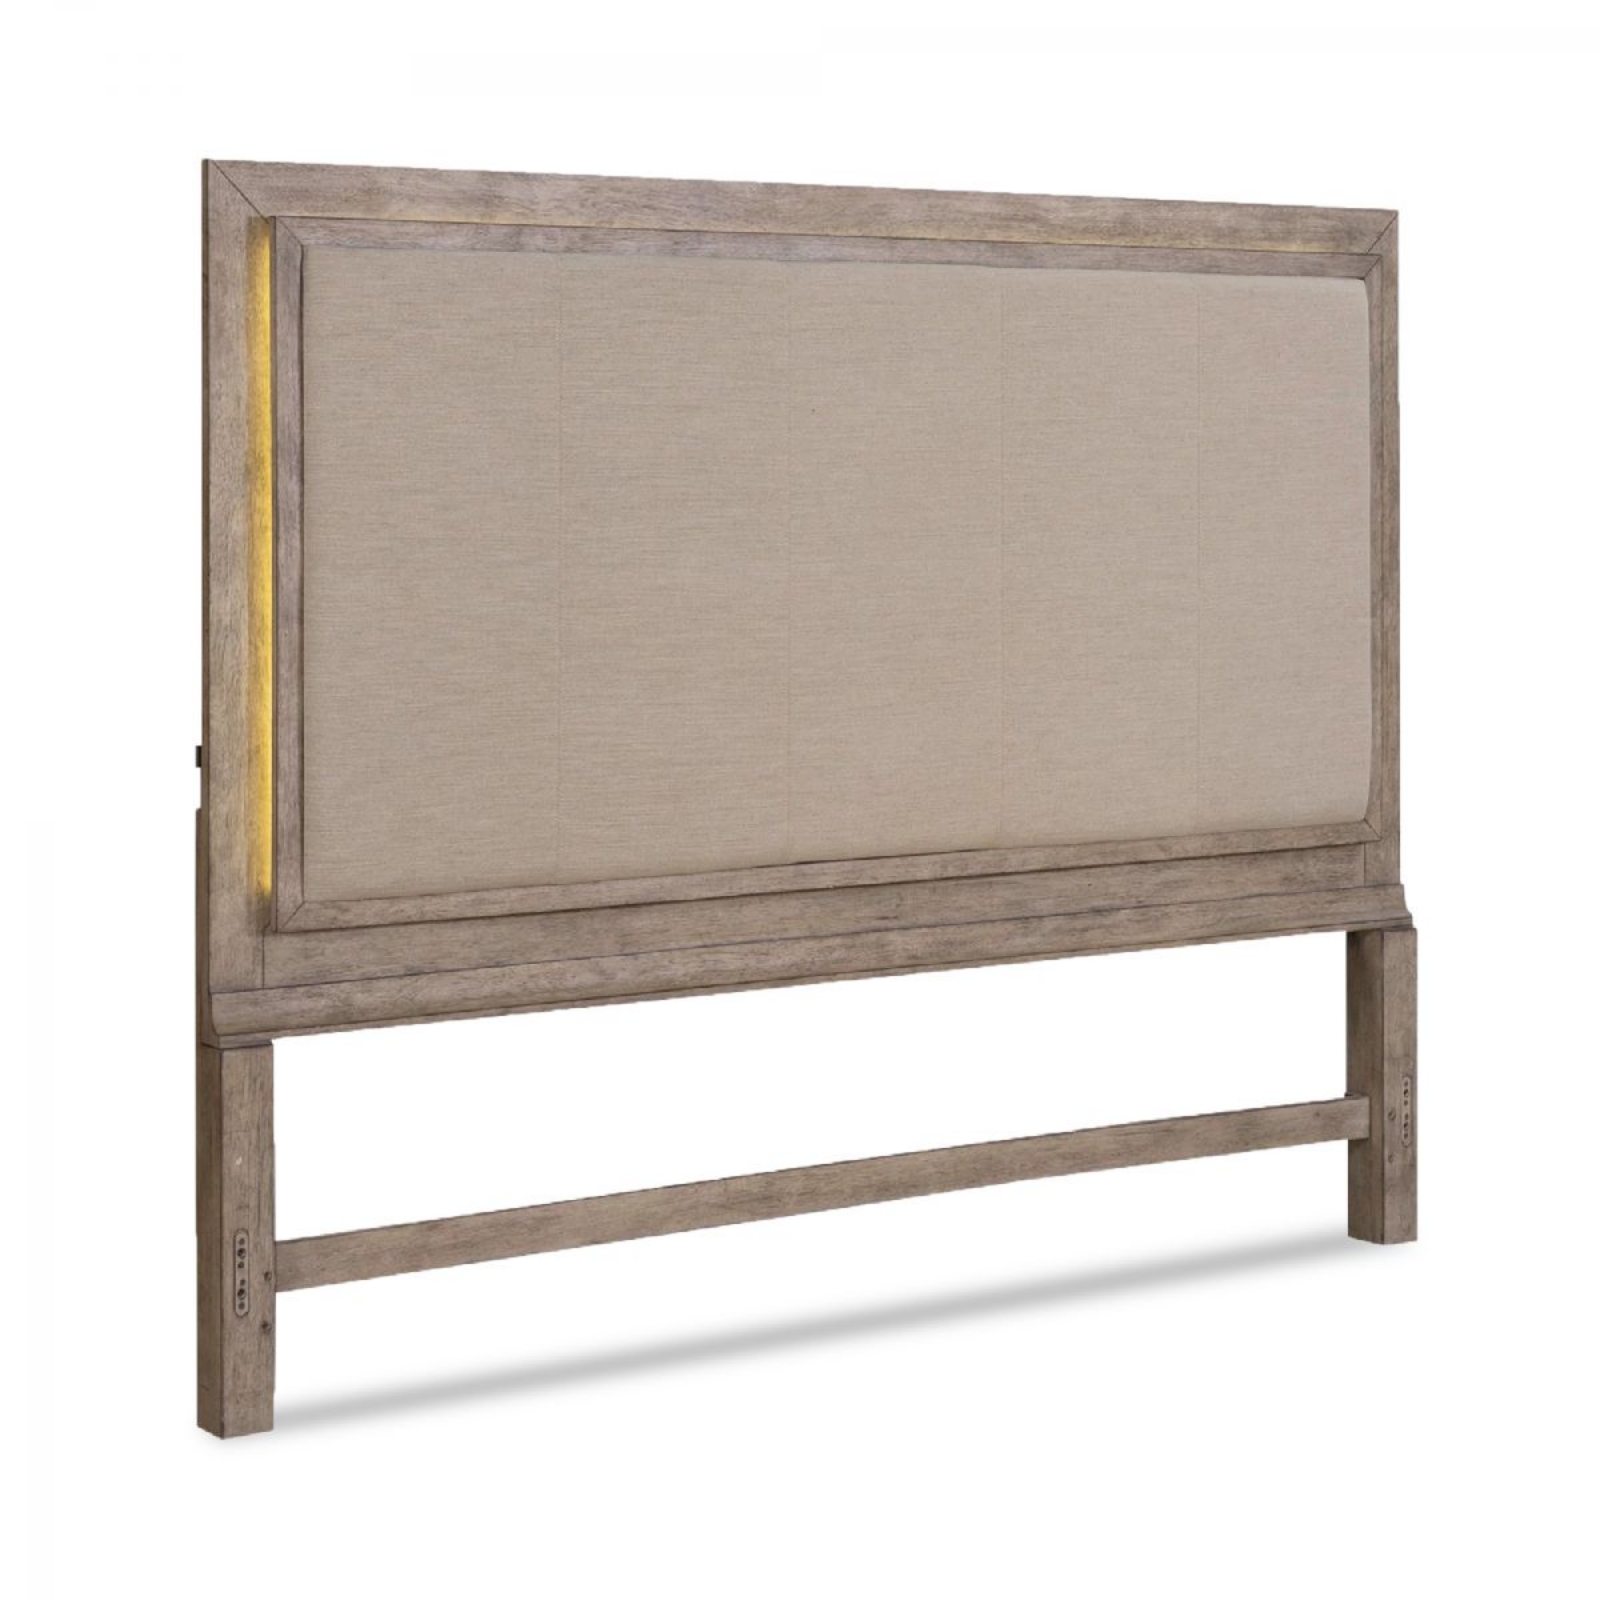 Picture of Canyon Road King Size Headboard